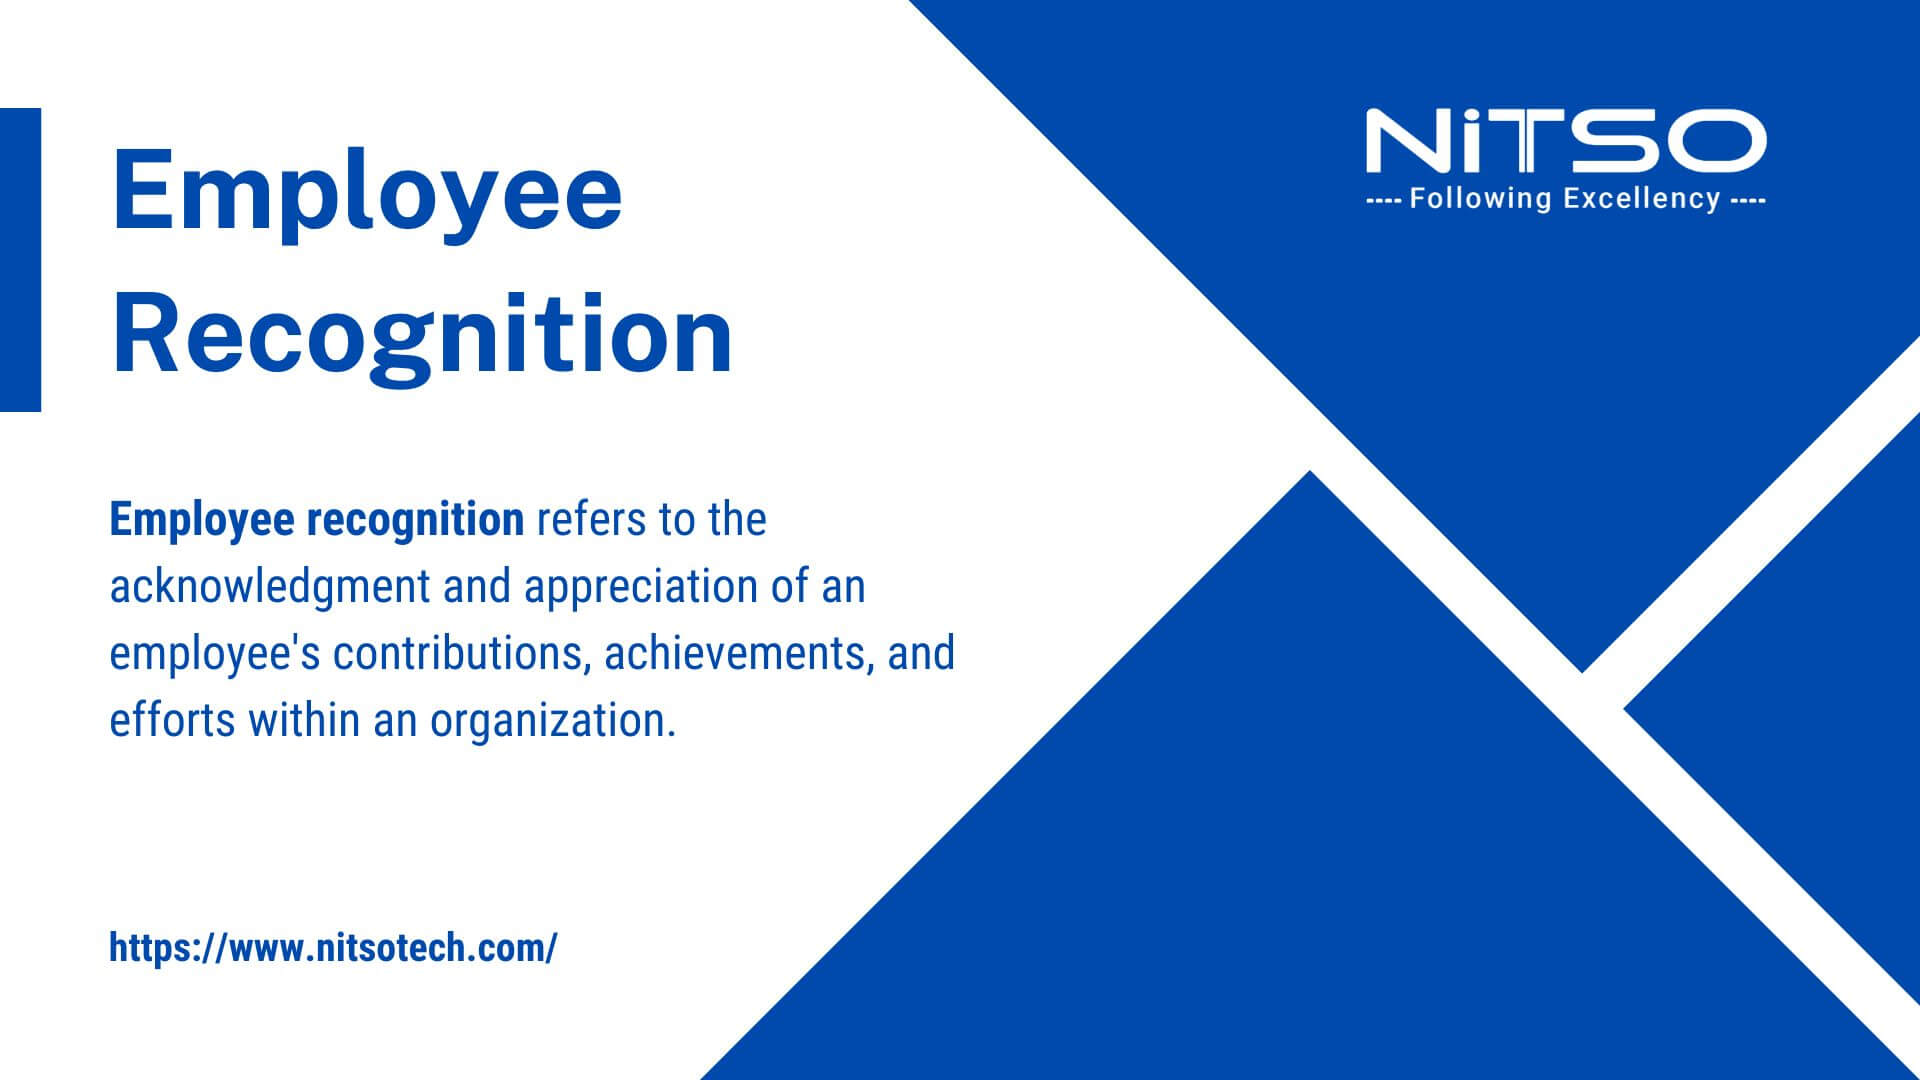 What Does Employee Recognition Mean?